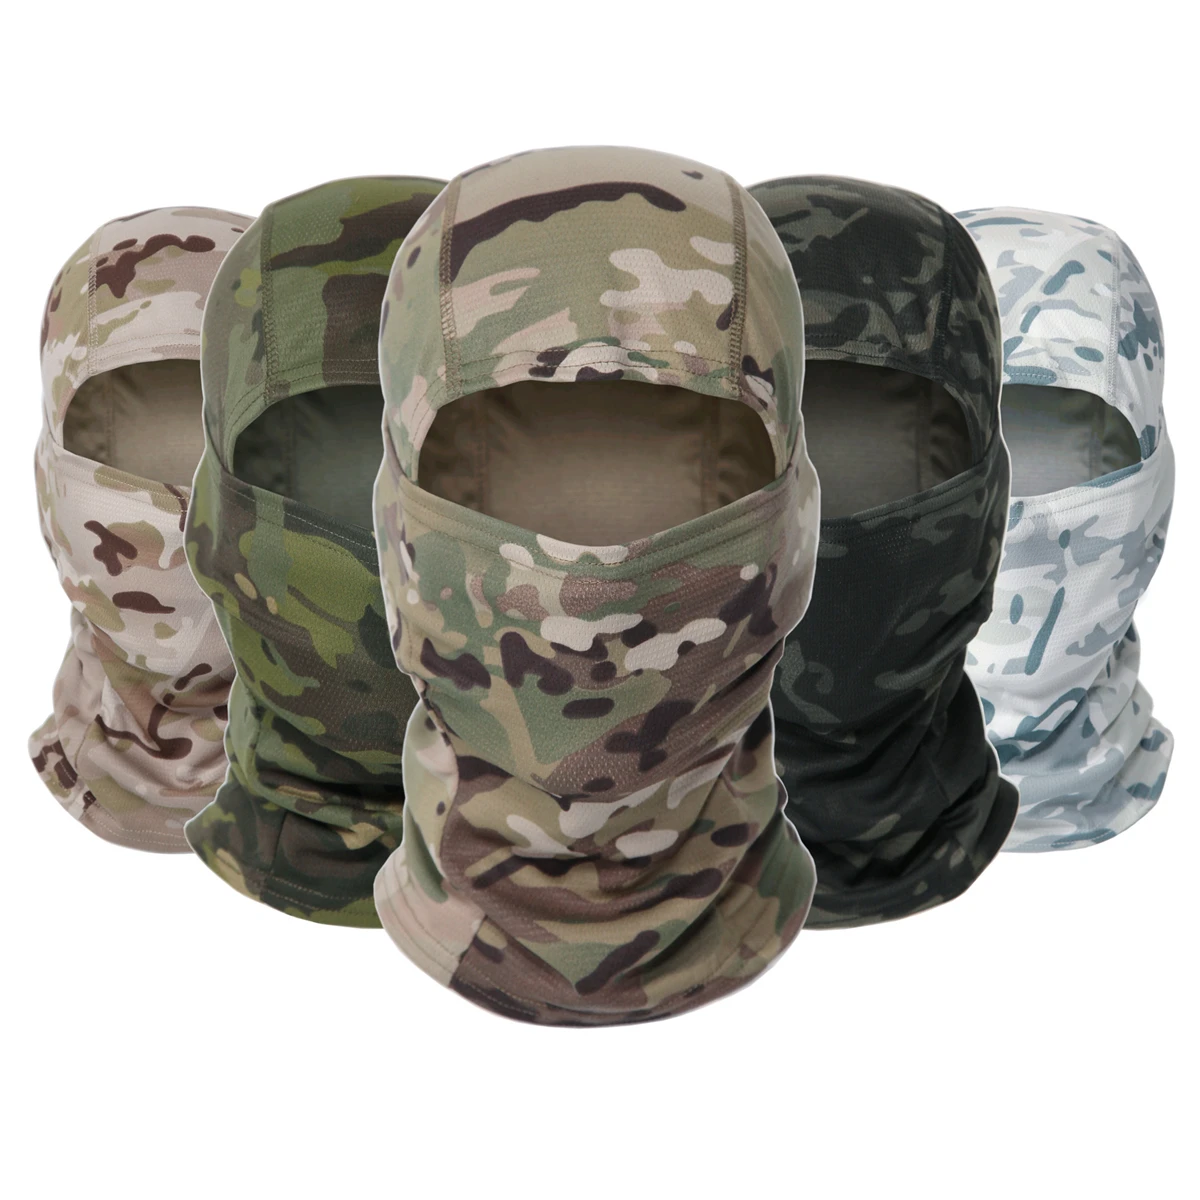 

Tactical Camouflage Balaclava Full Face Mask Ski Bike Cycling Army Hunting Head Cover Scarf Multicam Military Airsoft Cap Men